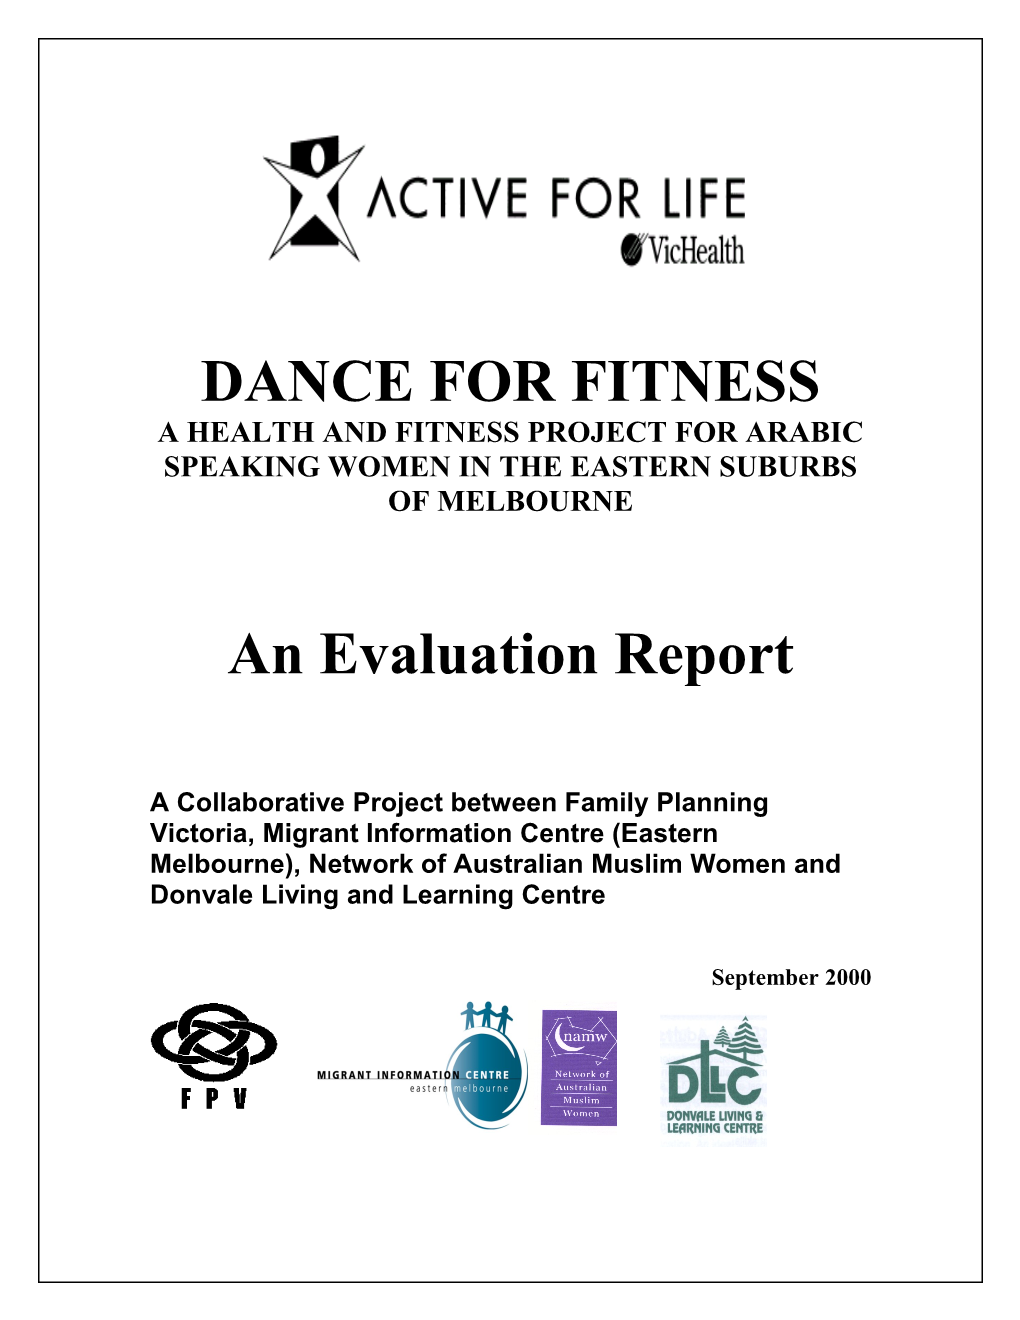 A Health and Fitness Project for Arabic Speaking Women in the Eastern Suburbs of Melbourne